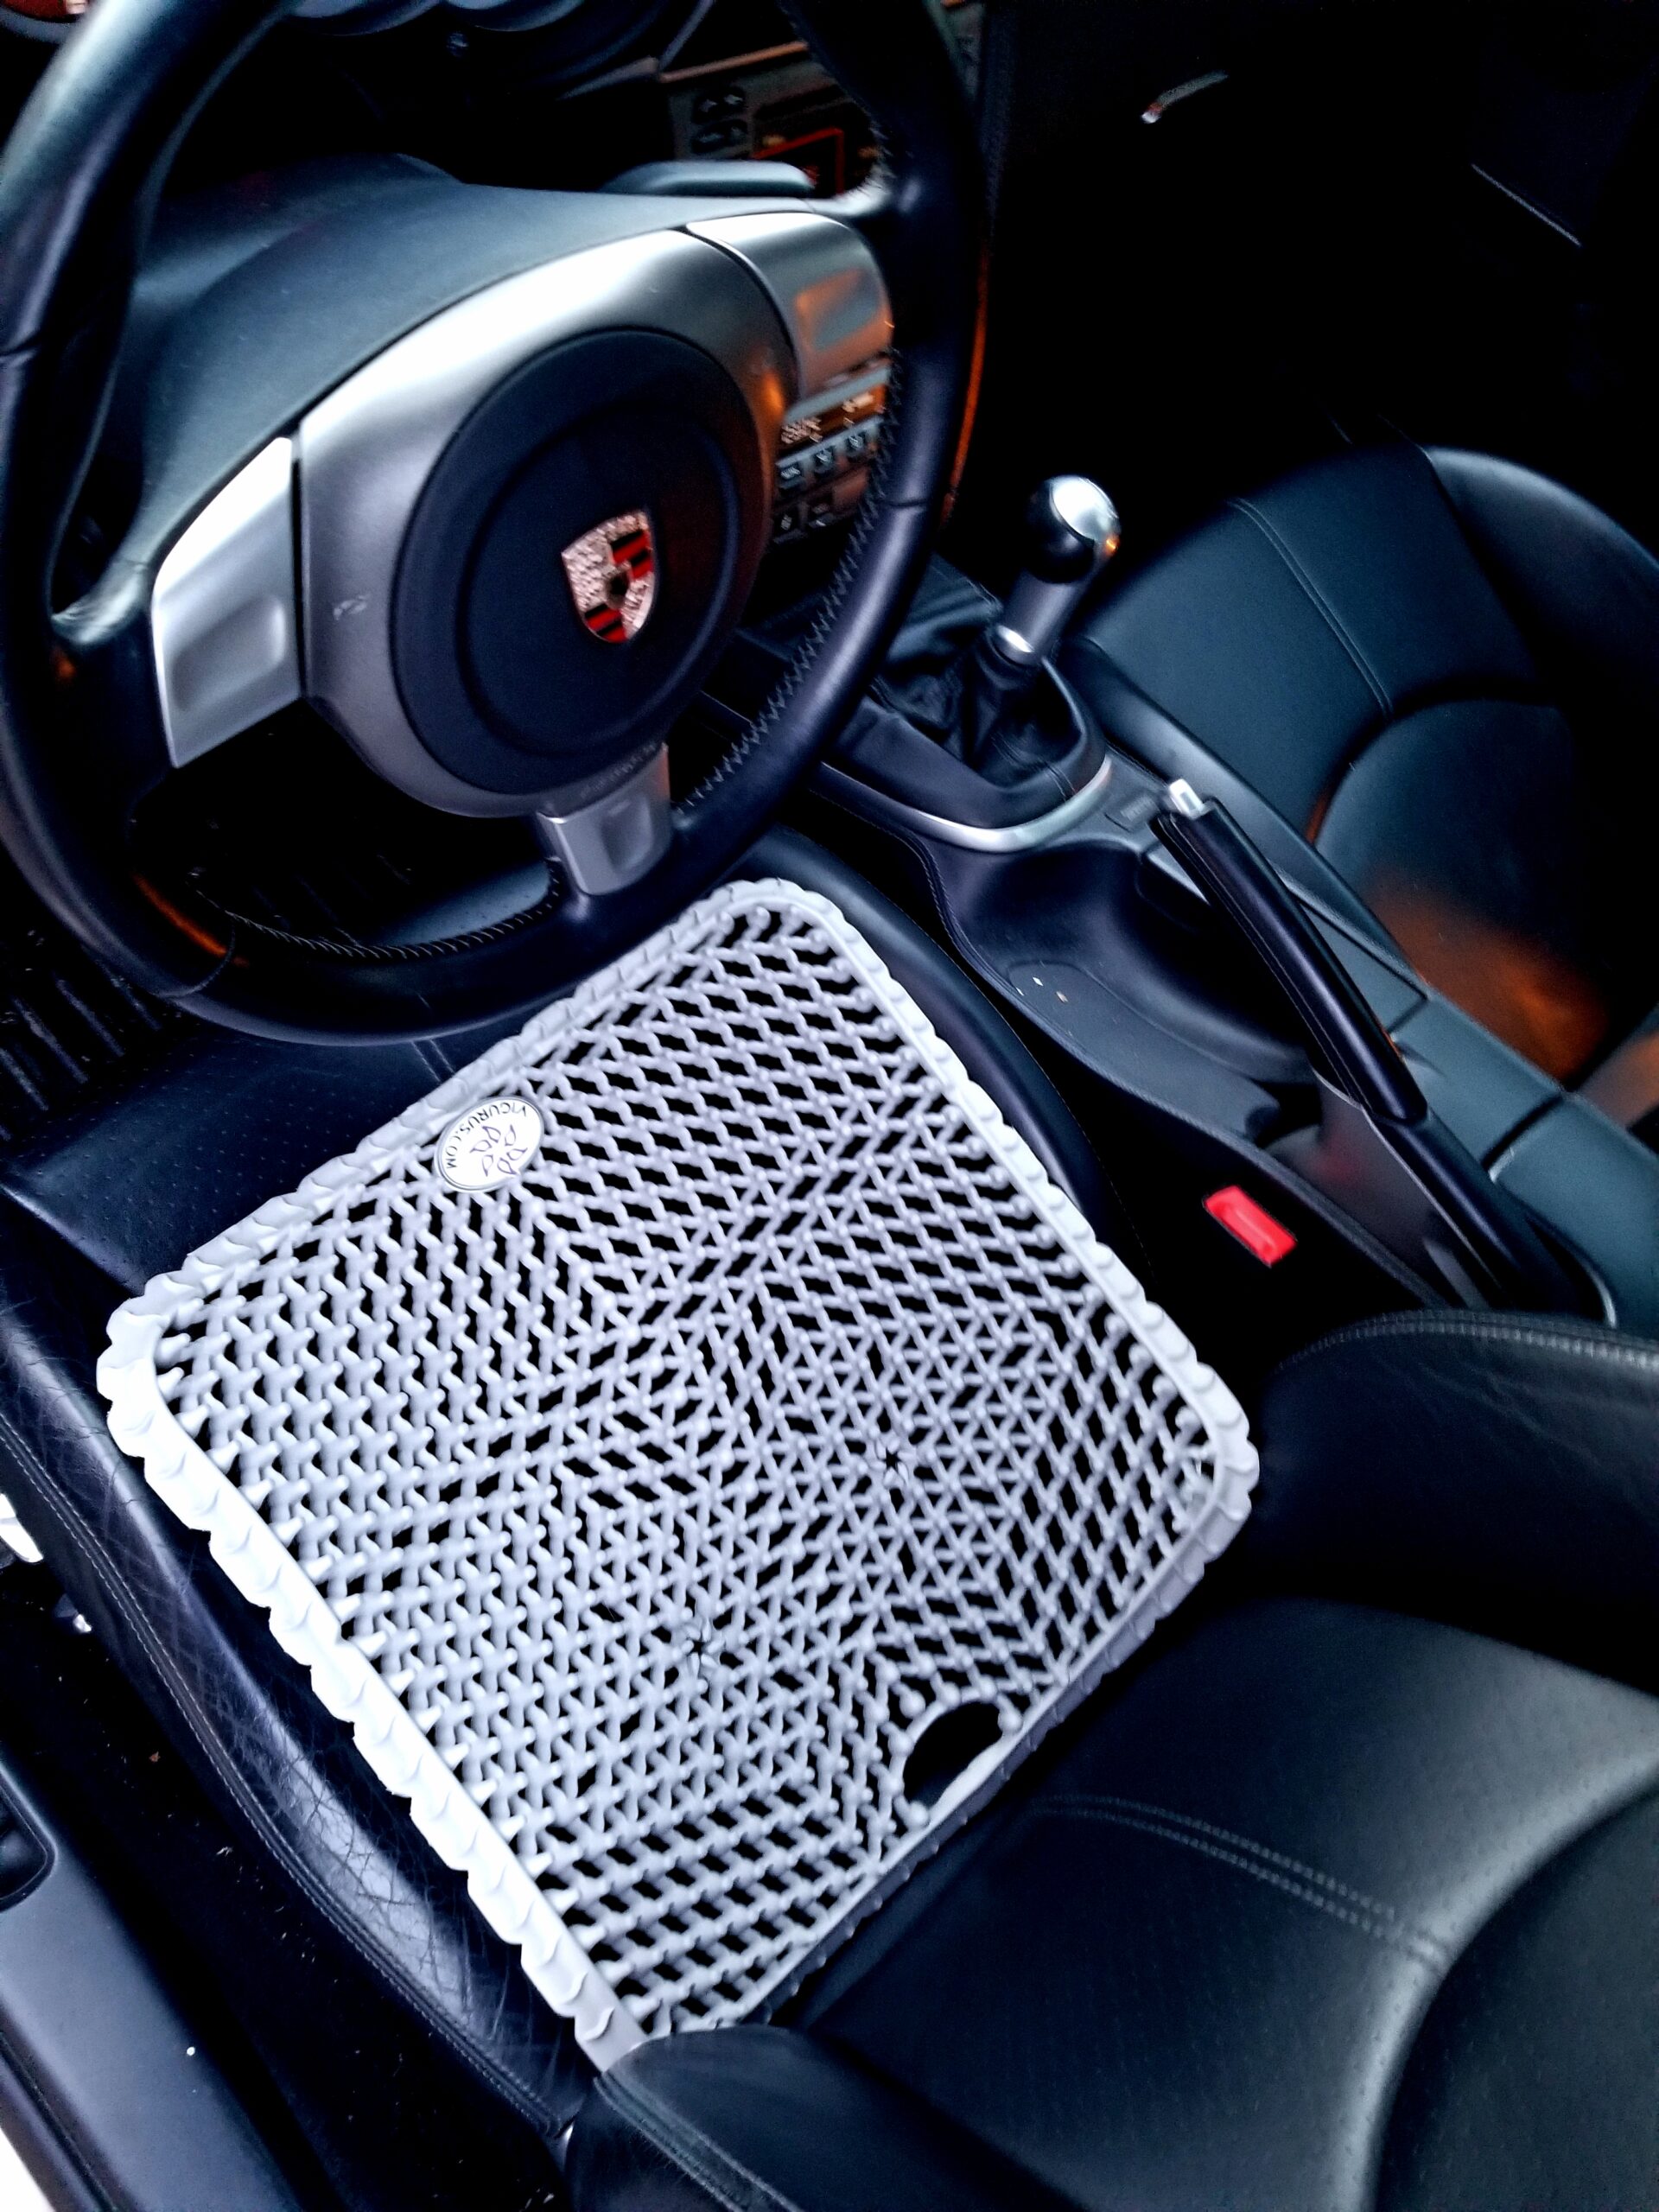 Hitting the Road? Get a SP1KE™ Car Cushion and Drive Further in